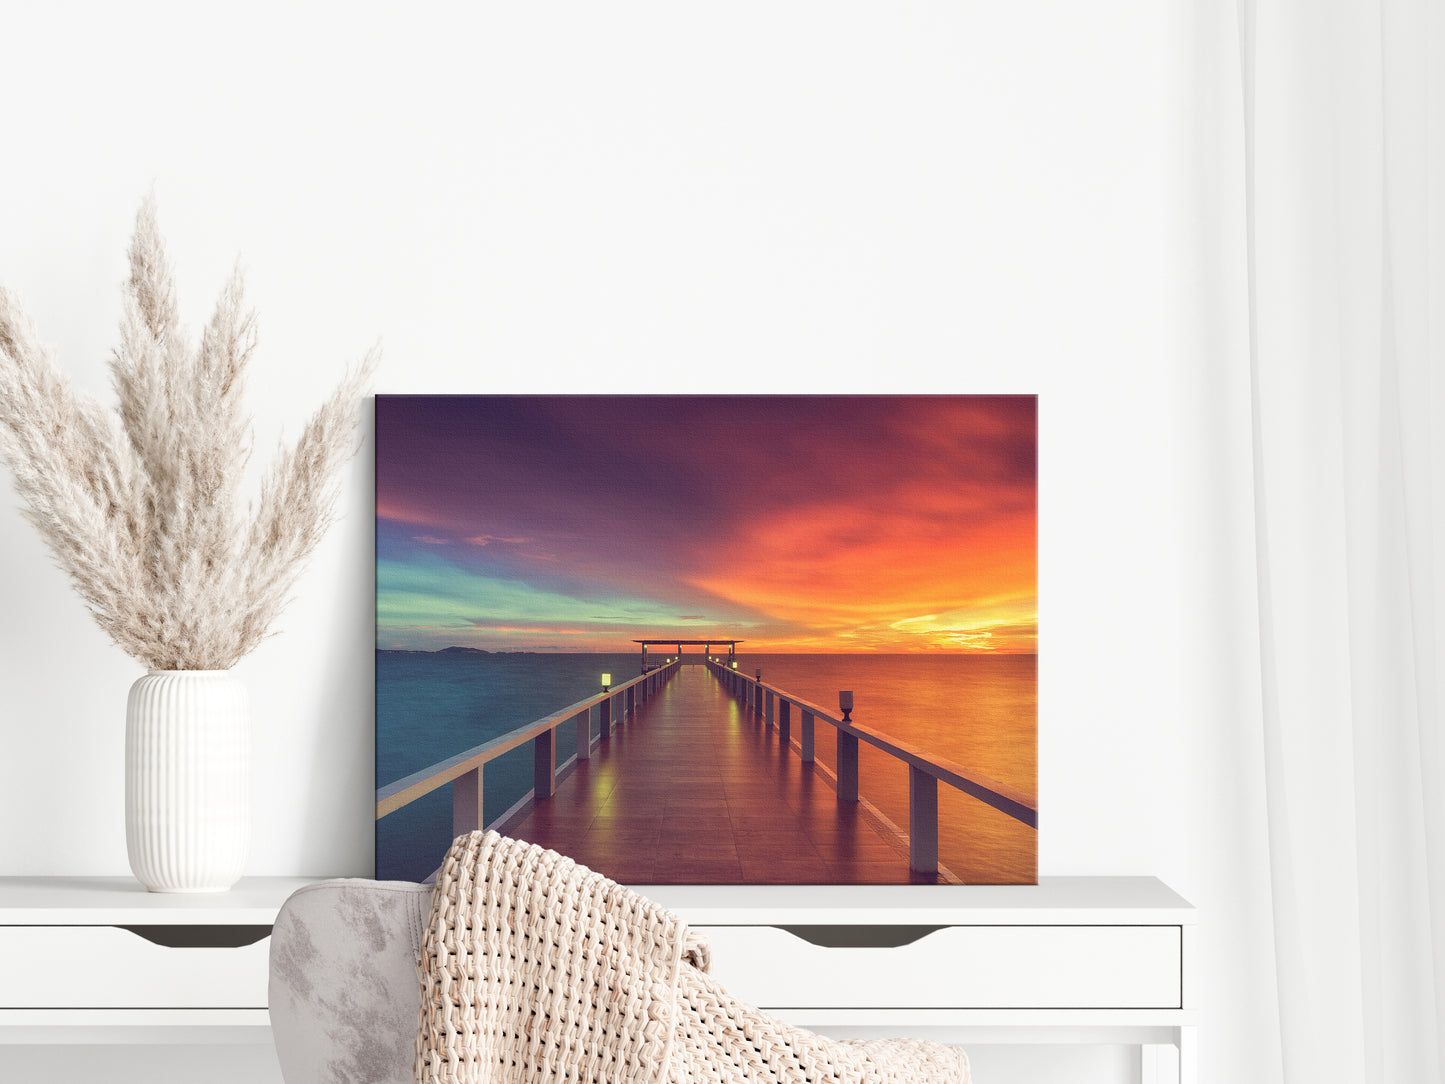 Office Wall Decor Modern: Surreal Wooden Pier At Sunset with Intrigued Effect Landscape Photo Canvas Wall Art Prints